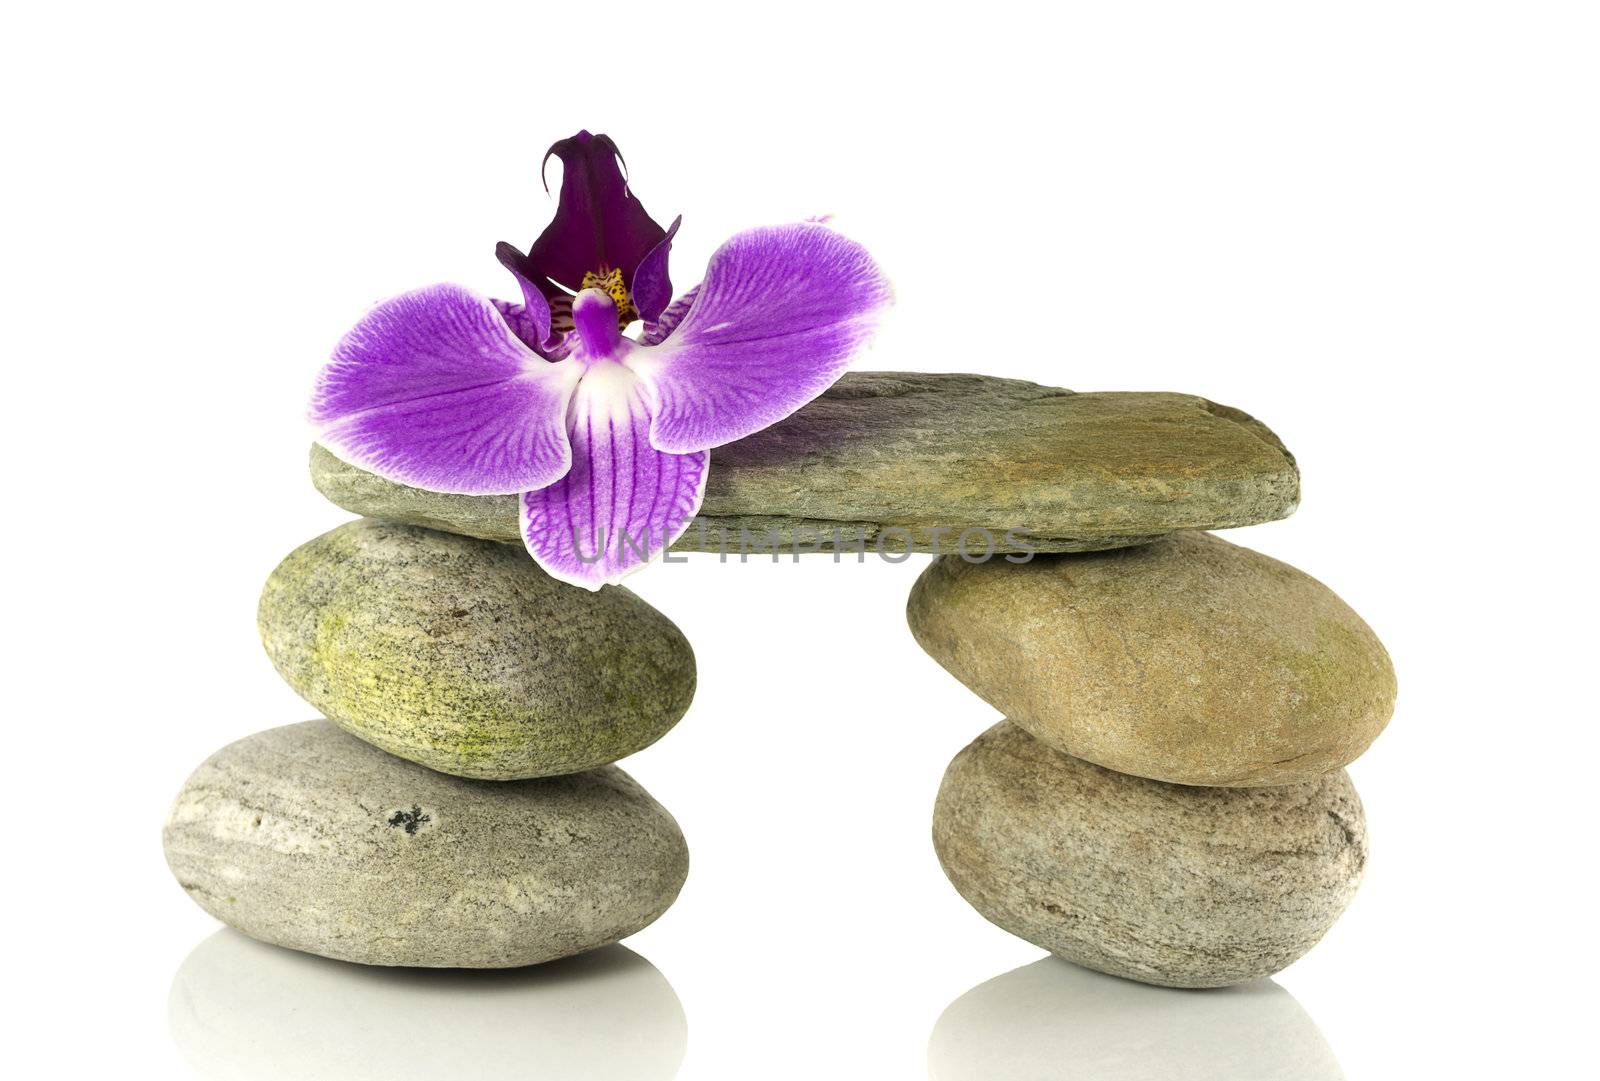 balance rocks with orchid  by compuinfoto